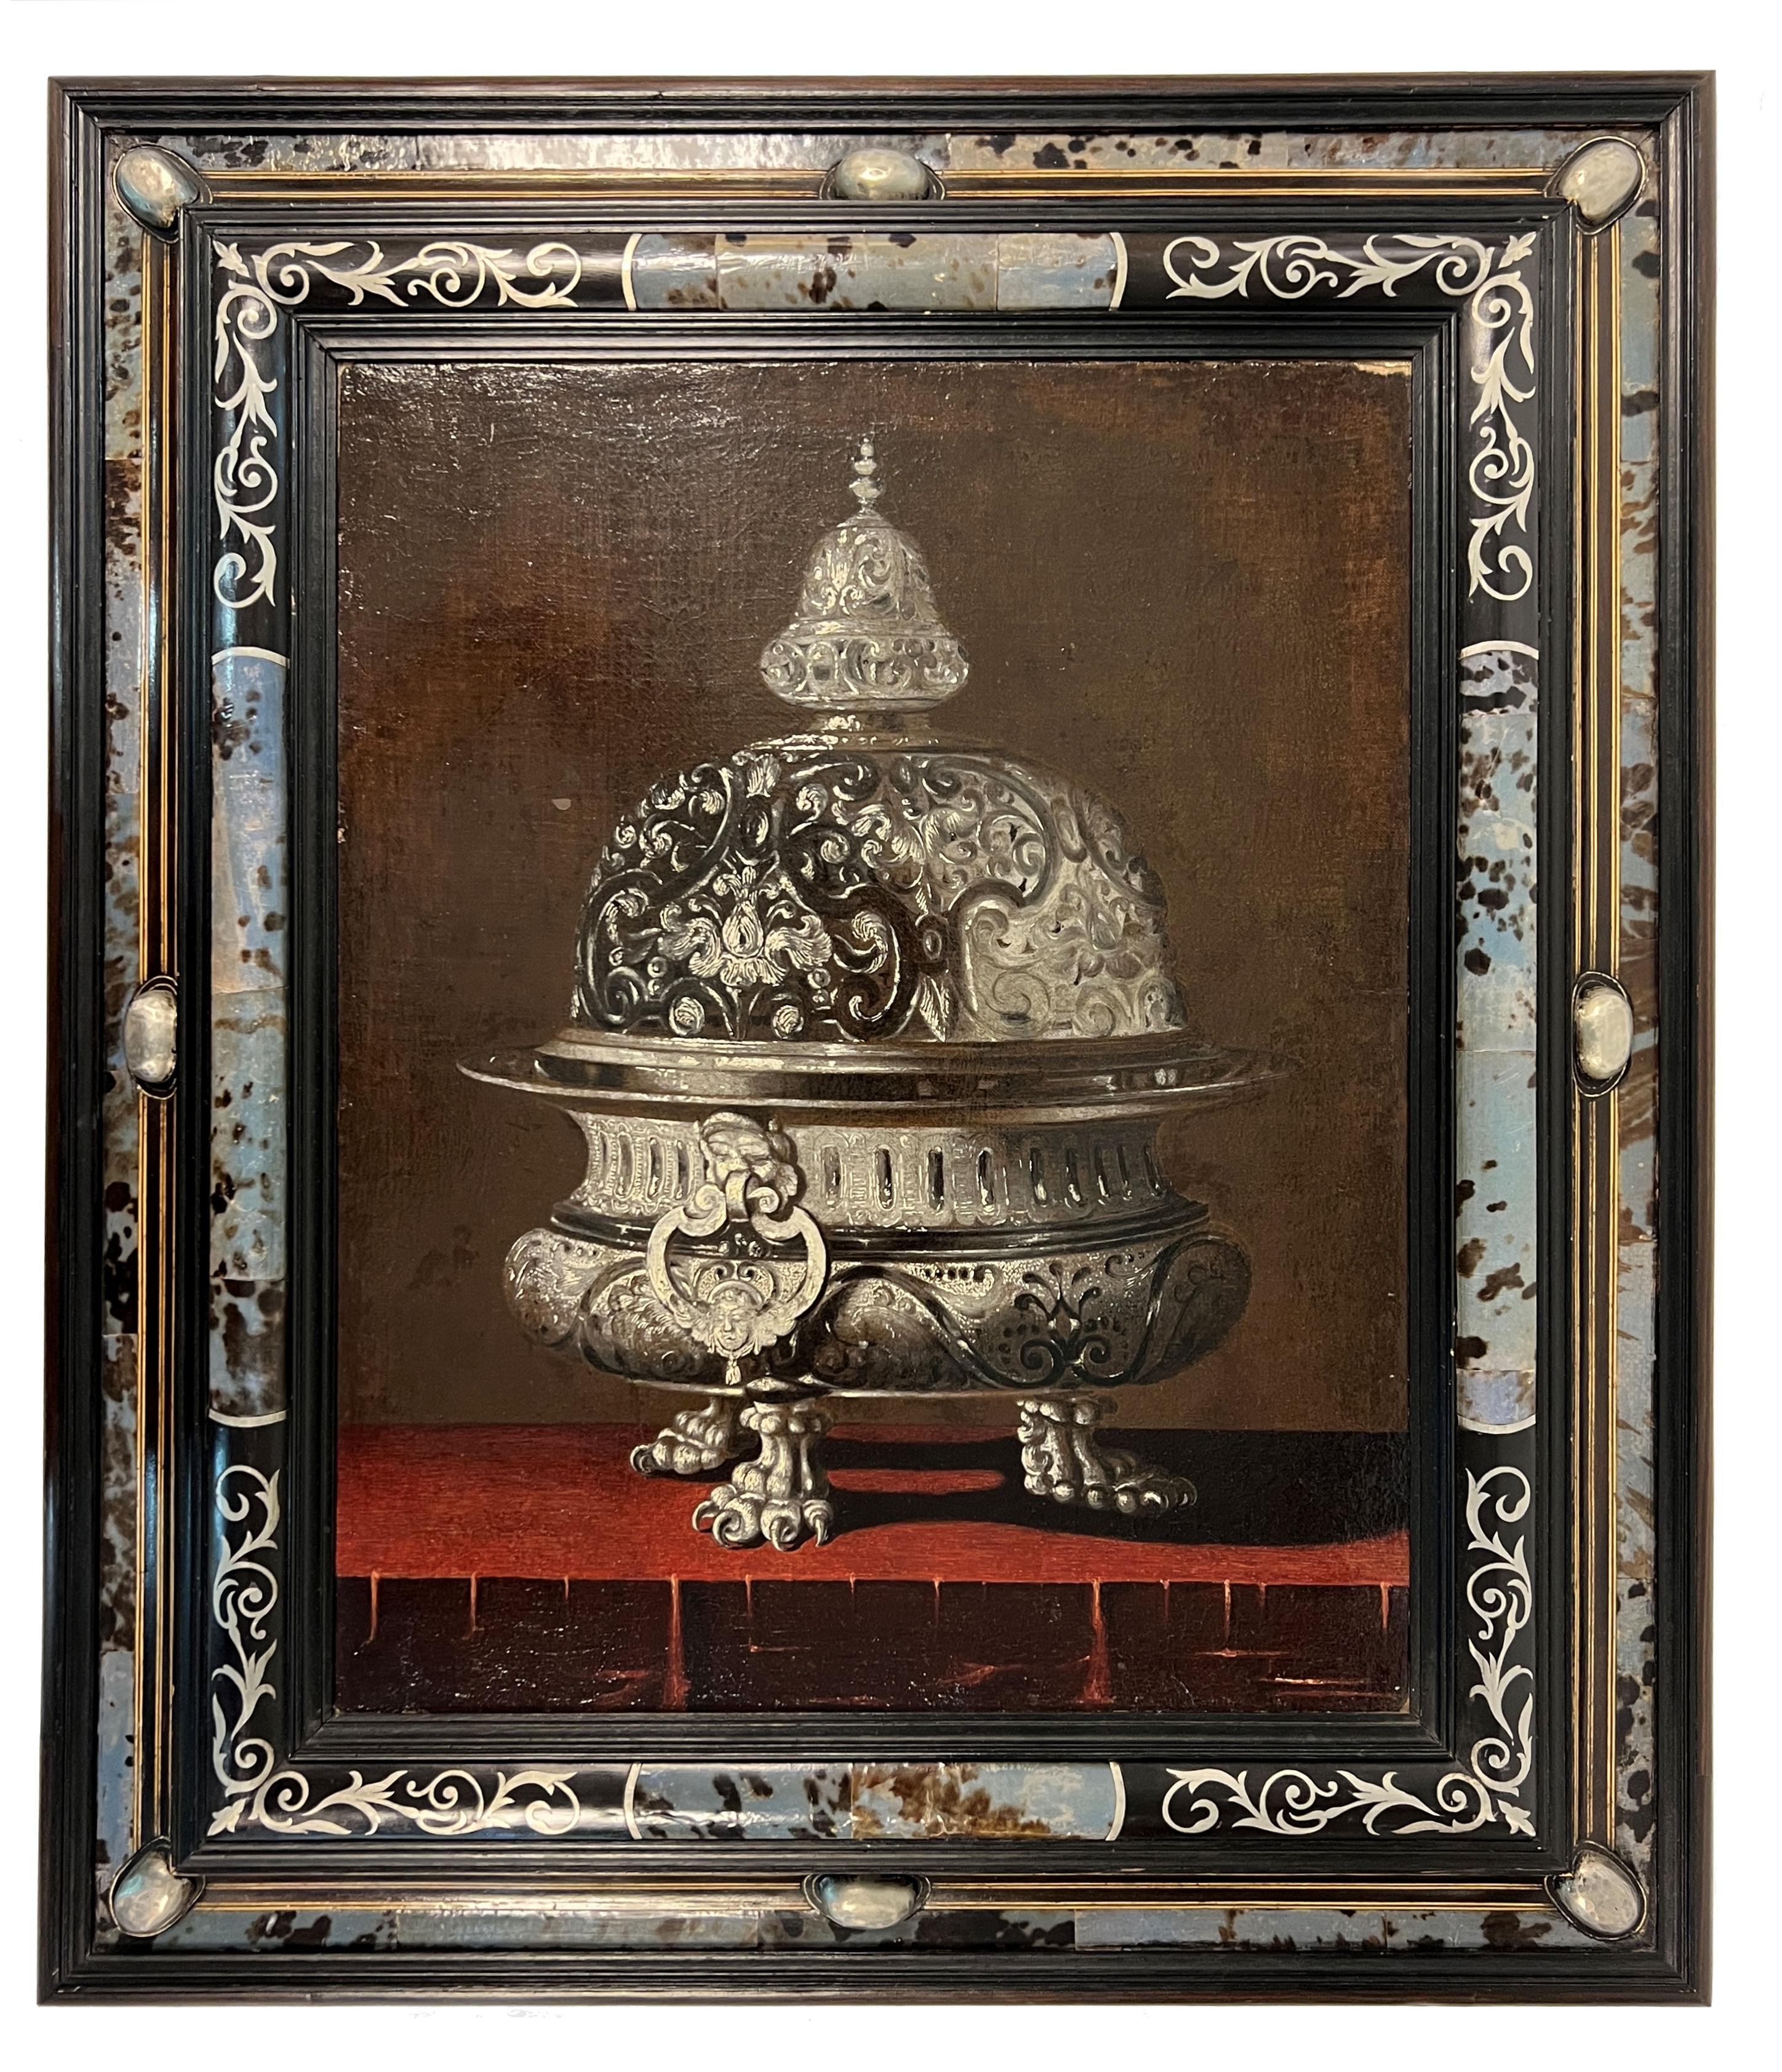 Our still life depicting a metal brazier on ledge is a rare painting by Baudouin Yvart (French, 1611-1690).  Stretcher measures 15 1/4 by 19 inches. 

It has an extraordinary ebonized sgraffito frame, 24 by 28 by 1 3/4 inches, with inlaid mother of